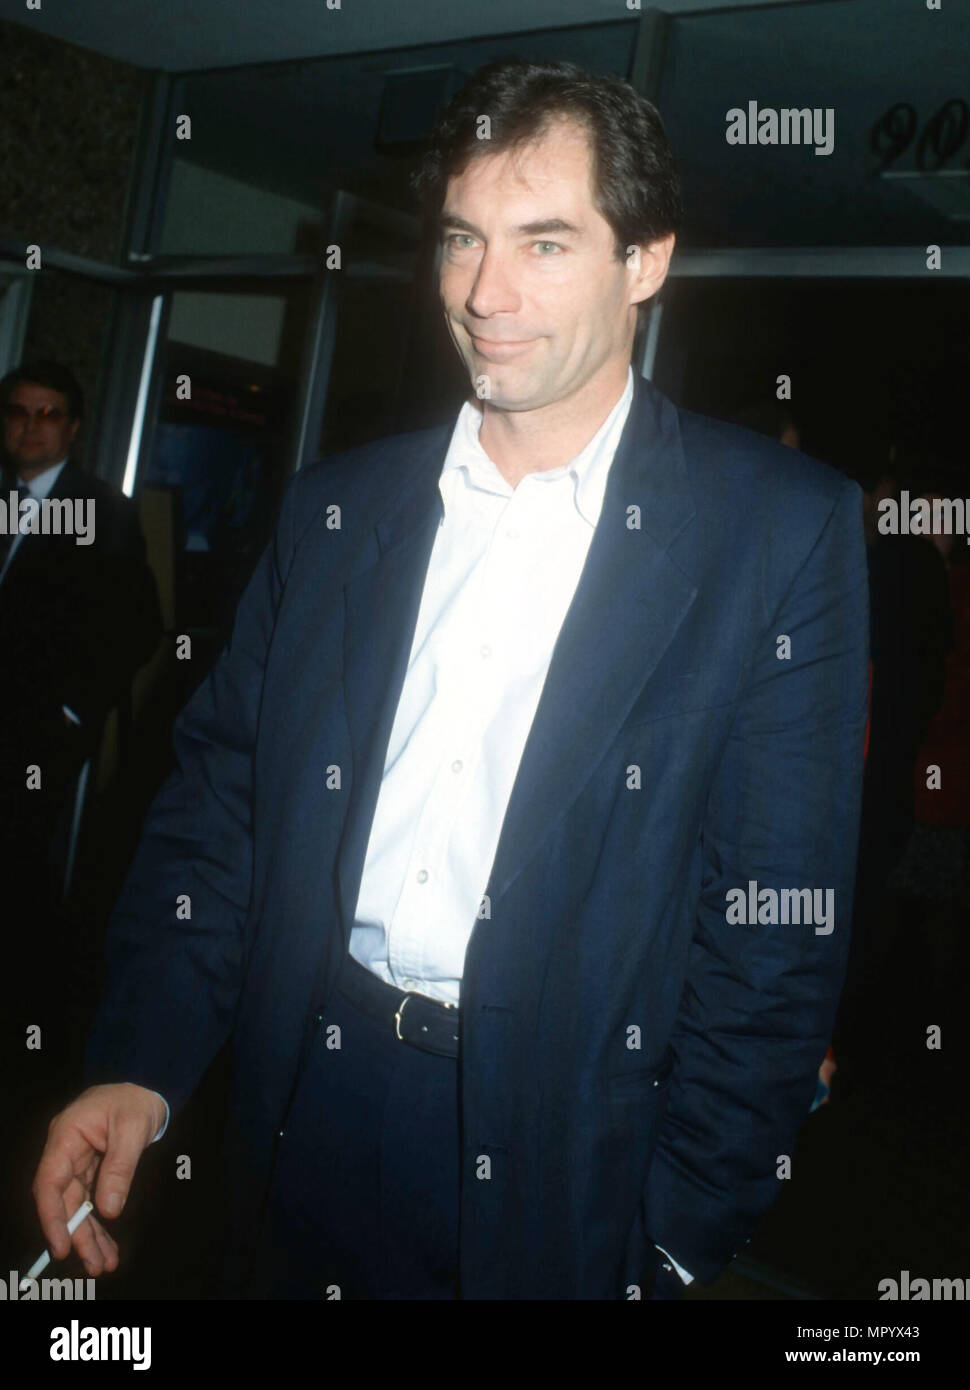 BEVERLY HILLS, CA - MARCH 5: Actor Timothy Dalton attends the premiere of 'La Femme Nikita' on March 5, 1991 at the Music Hall Theater in Beverly Hills, California. Photo by Barry King/Alamy Stock Photo Stock Photo